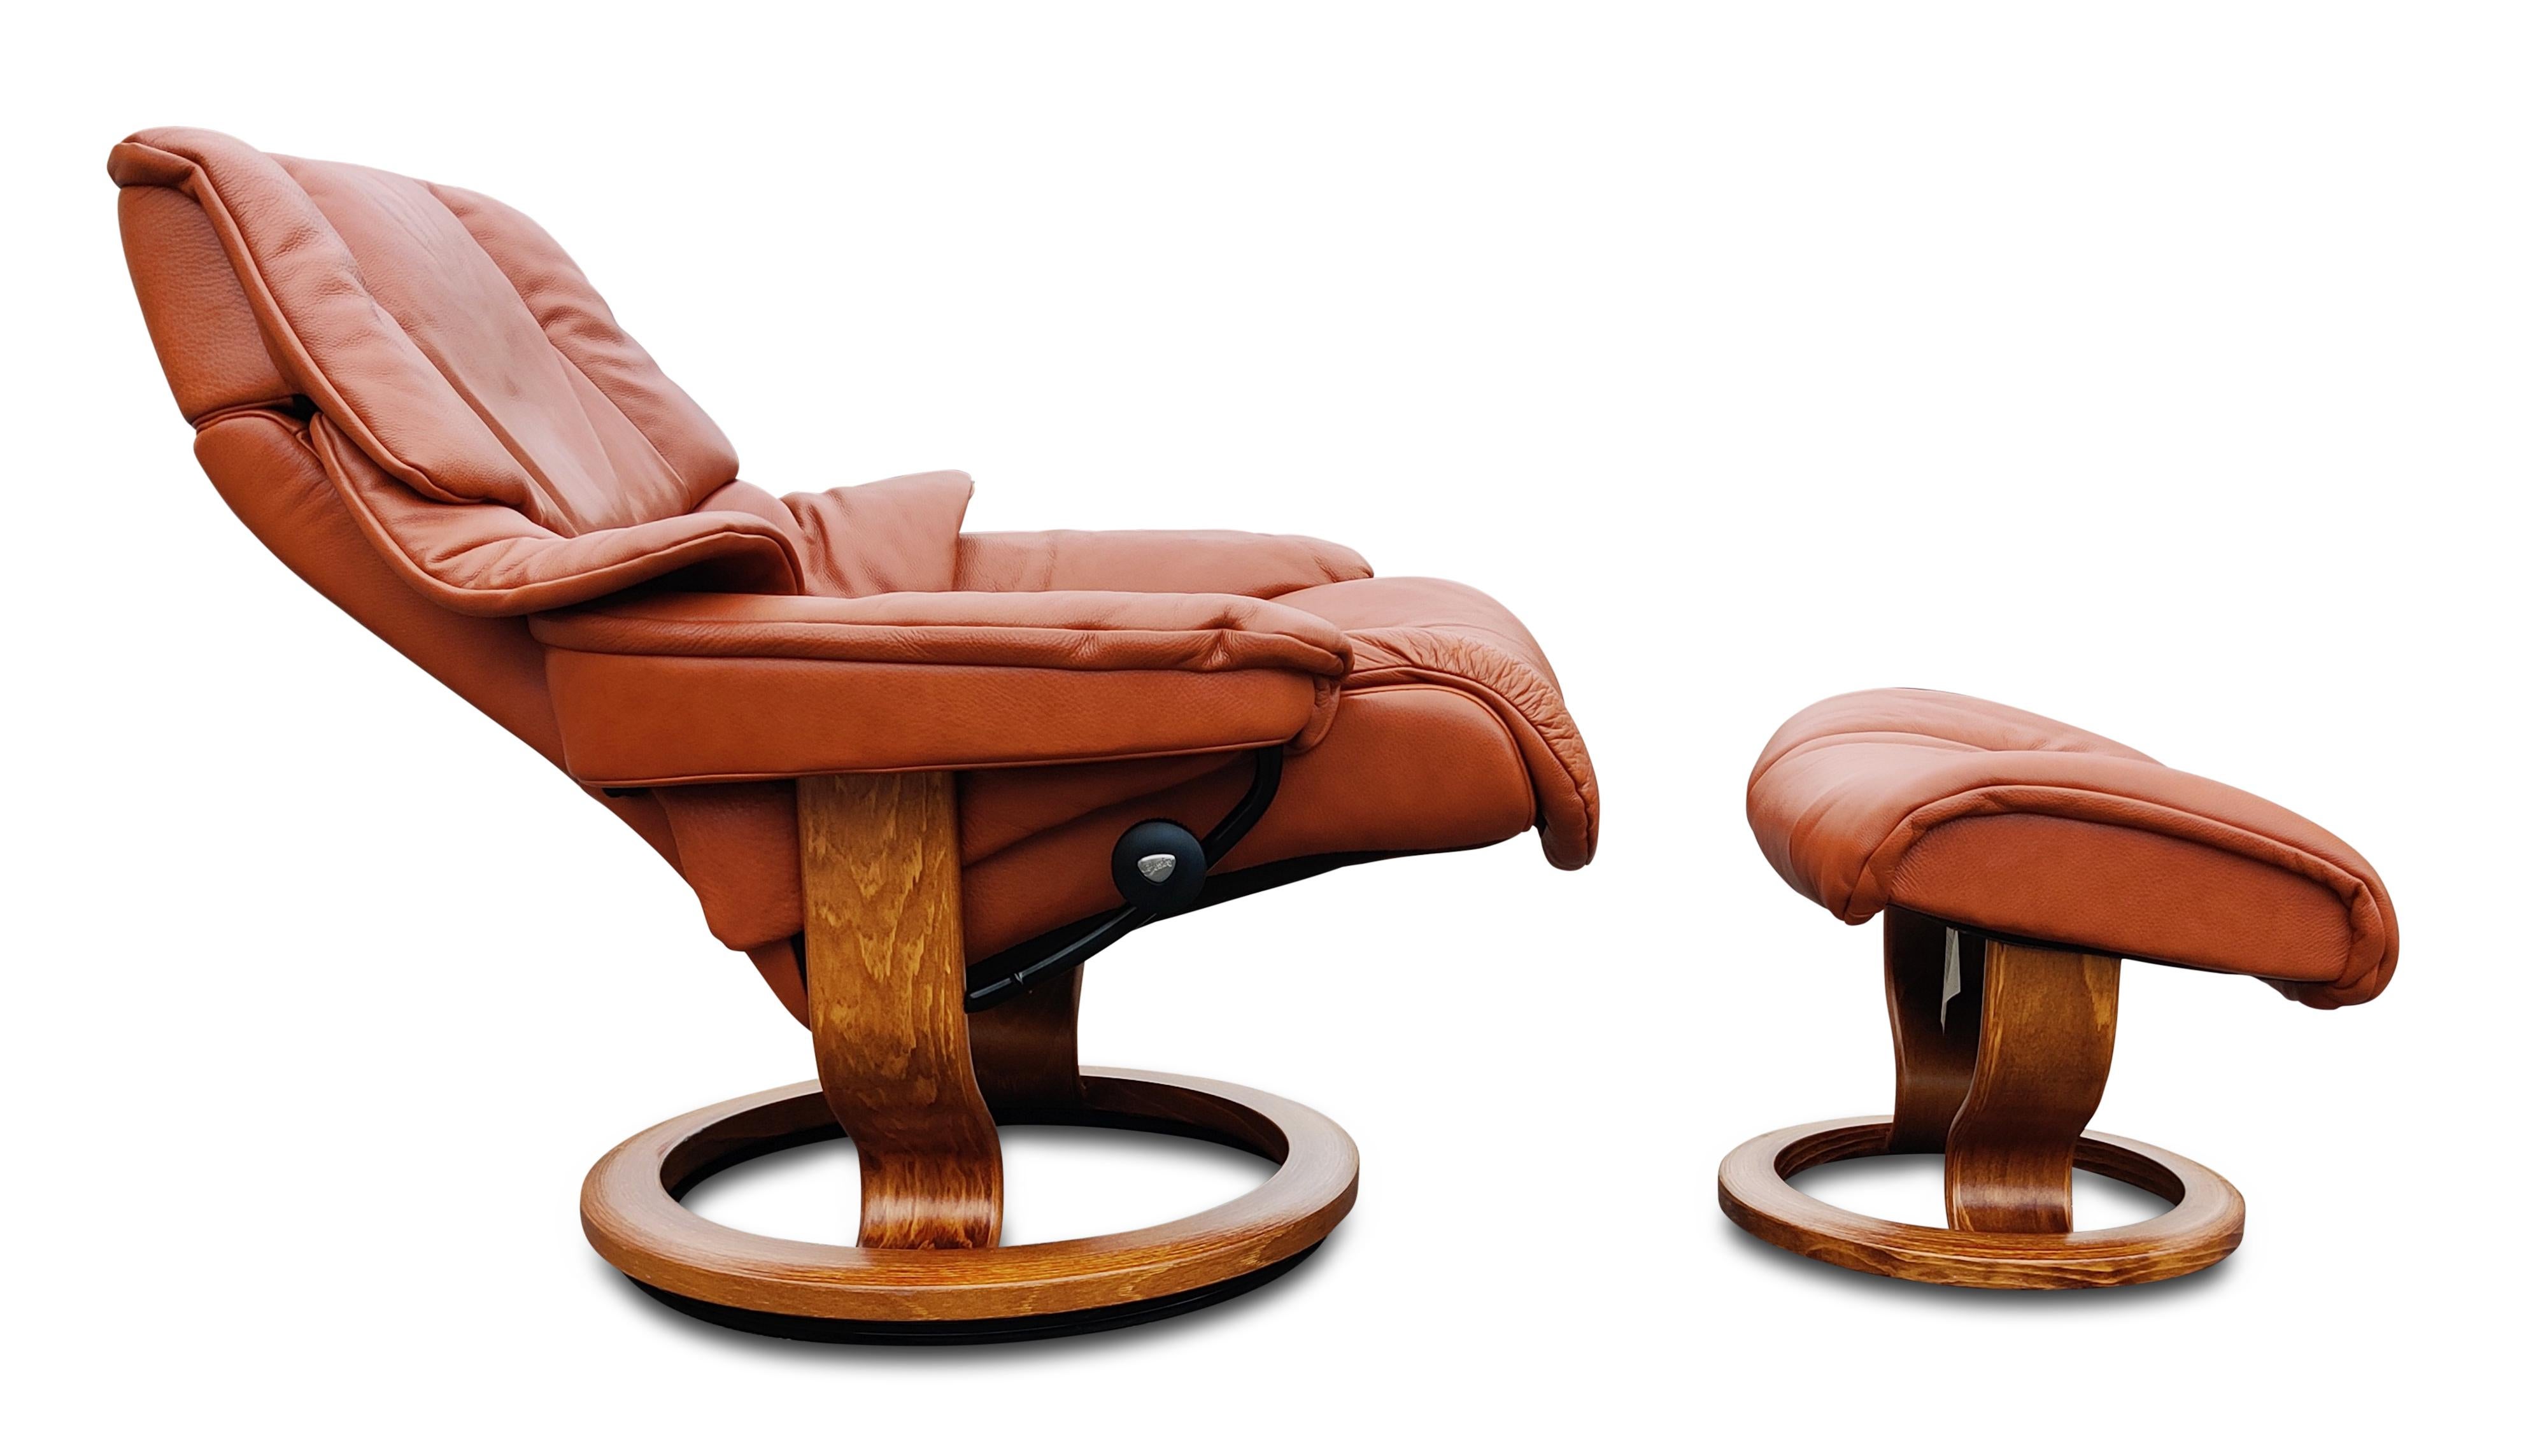 A Scandinavian style recliner or adjustable lounge and ottoman by Ekornes, their Stressless brand. With teak-plywood wood bases and metal frames and genuine leather upholstery, this is a comfortable brown color leather recliner on a round